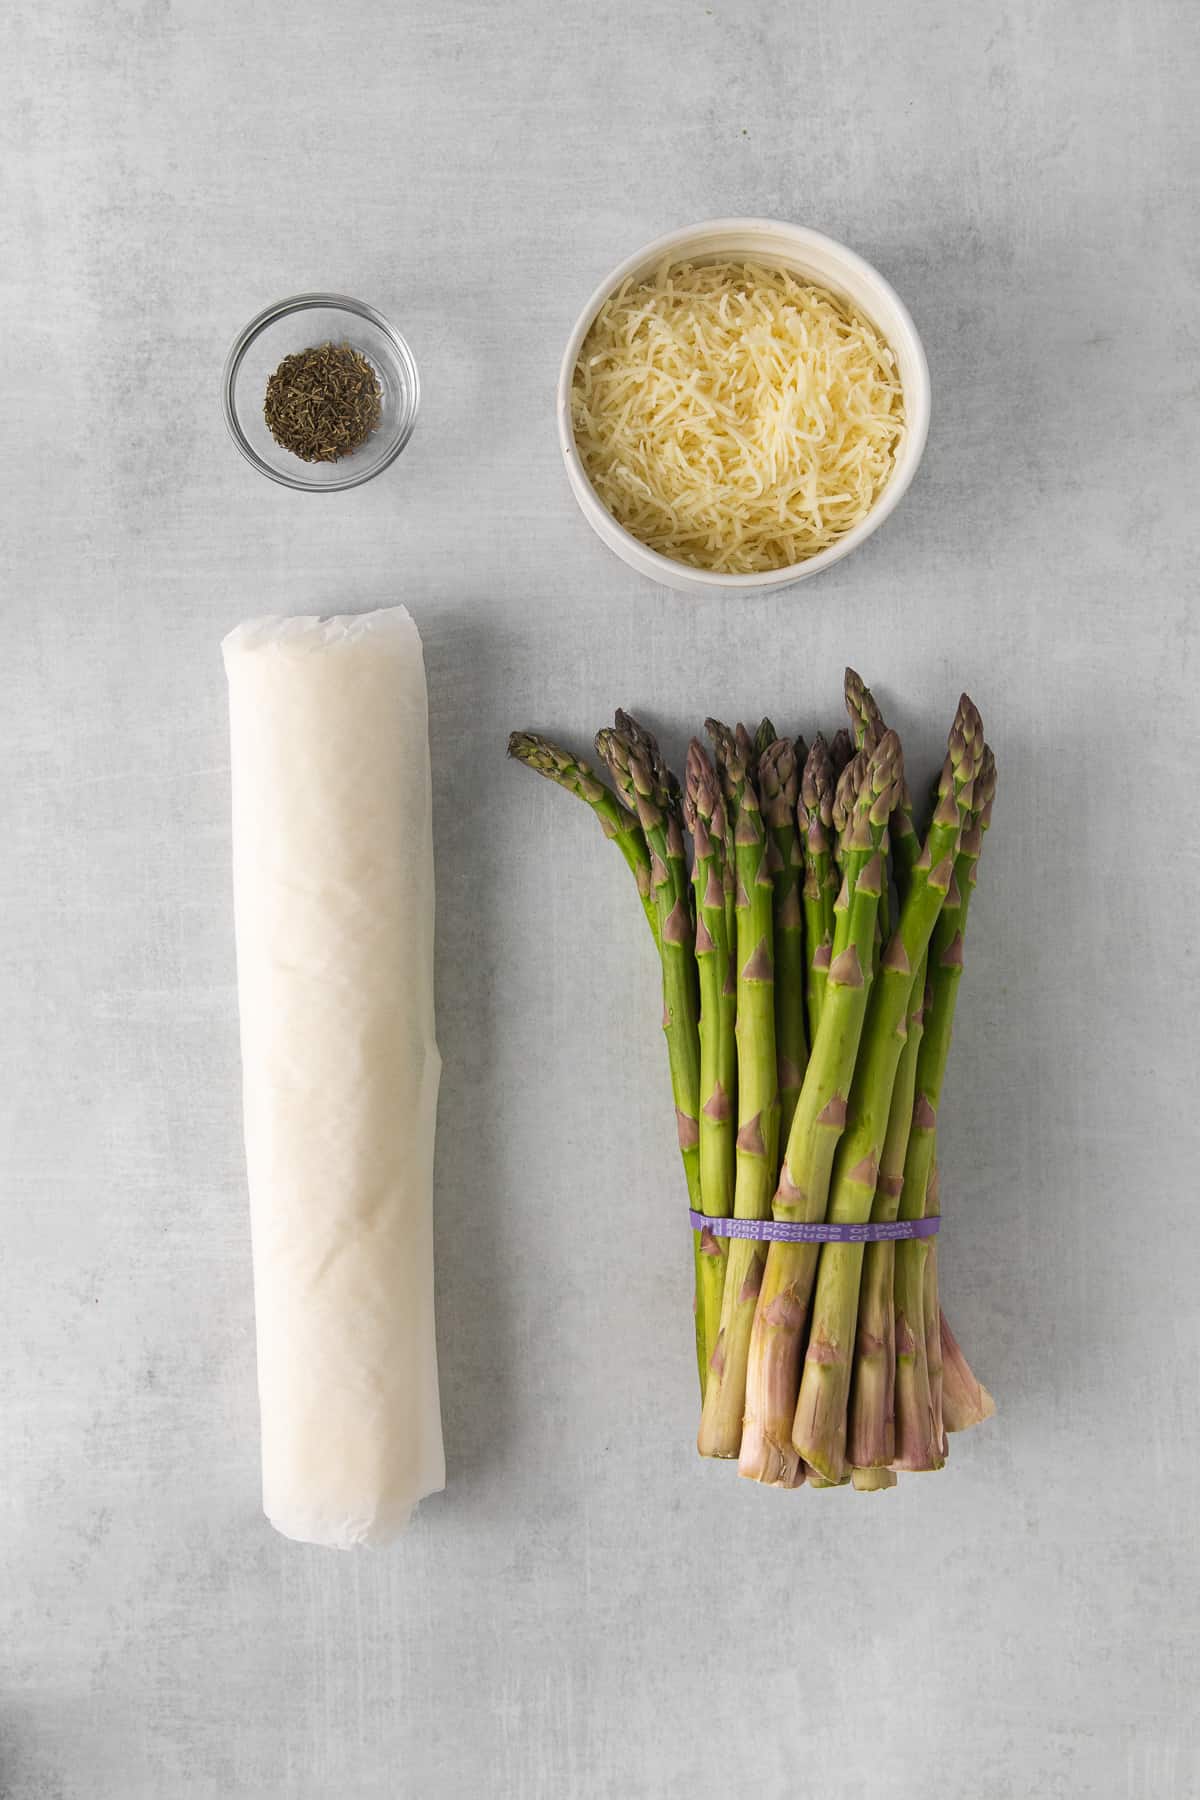 Ingredients for asparagus tart on a counter.